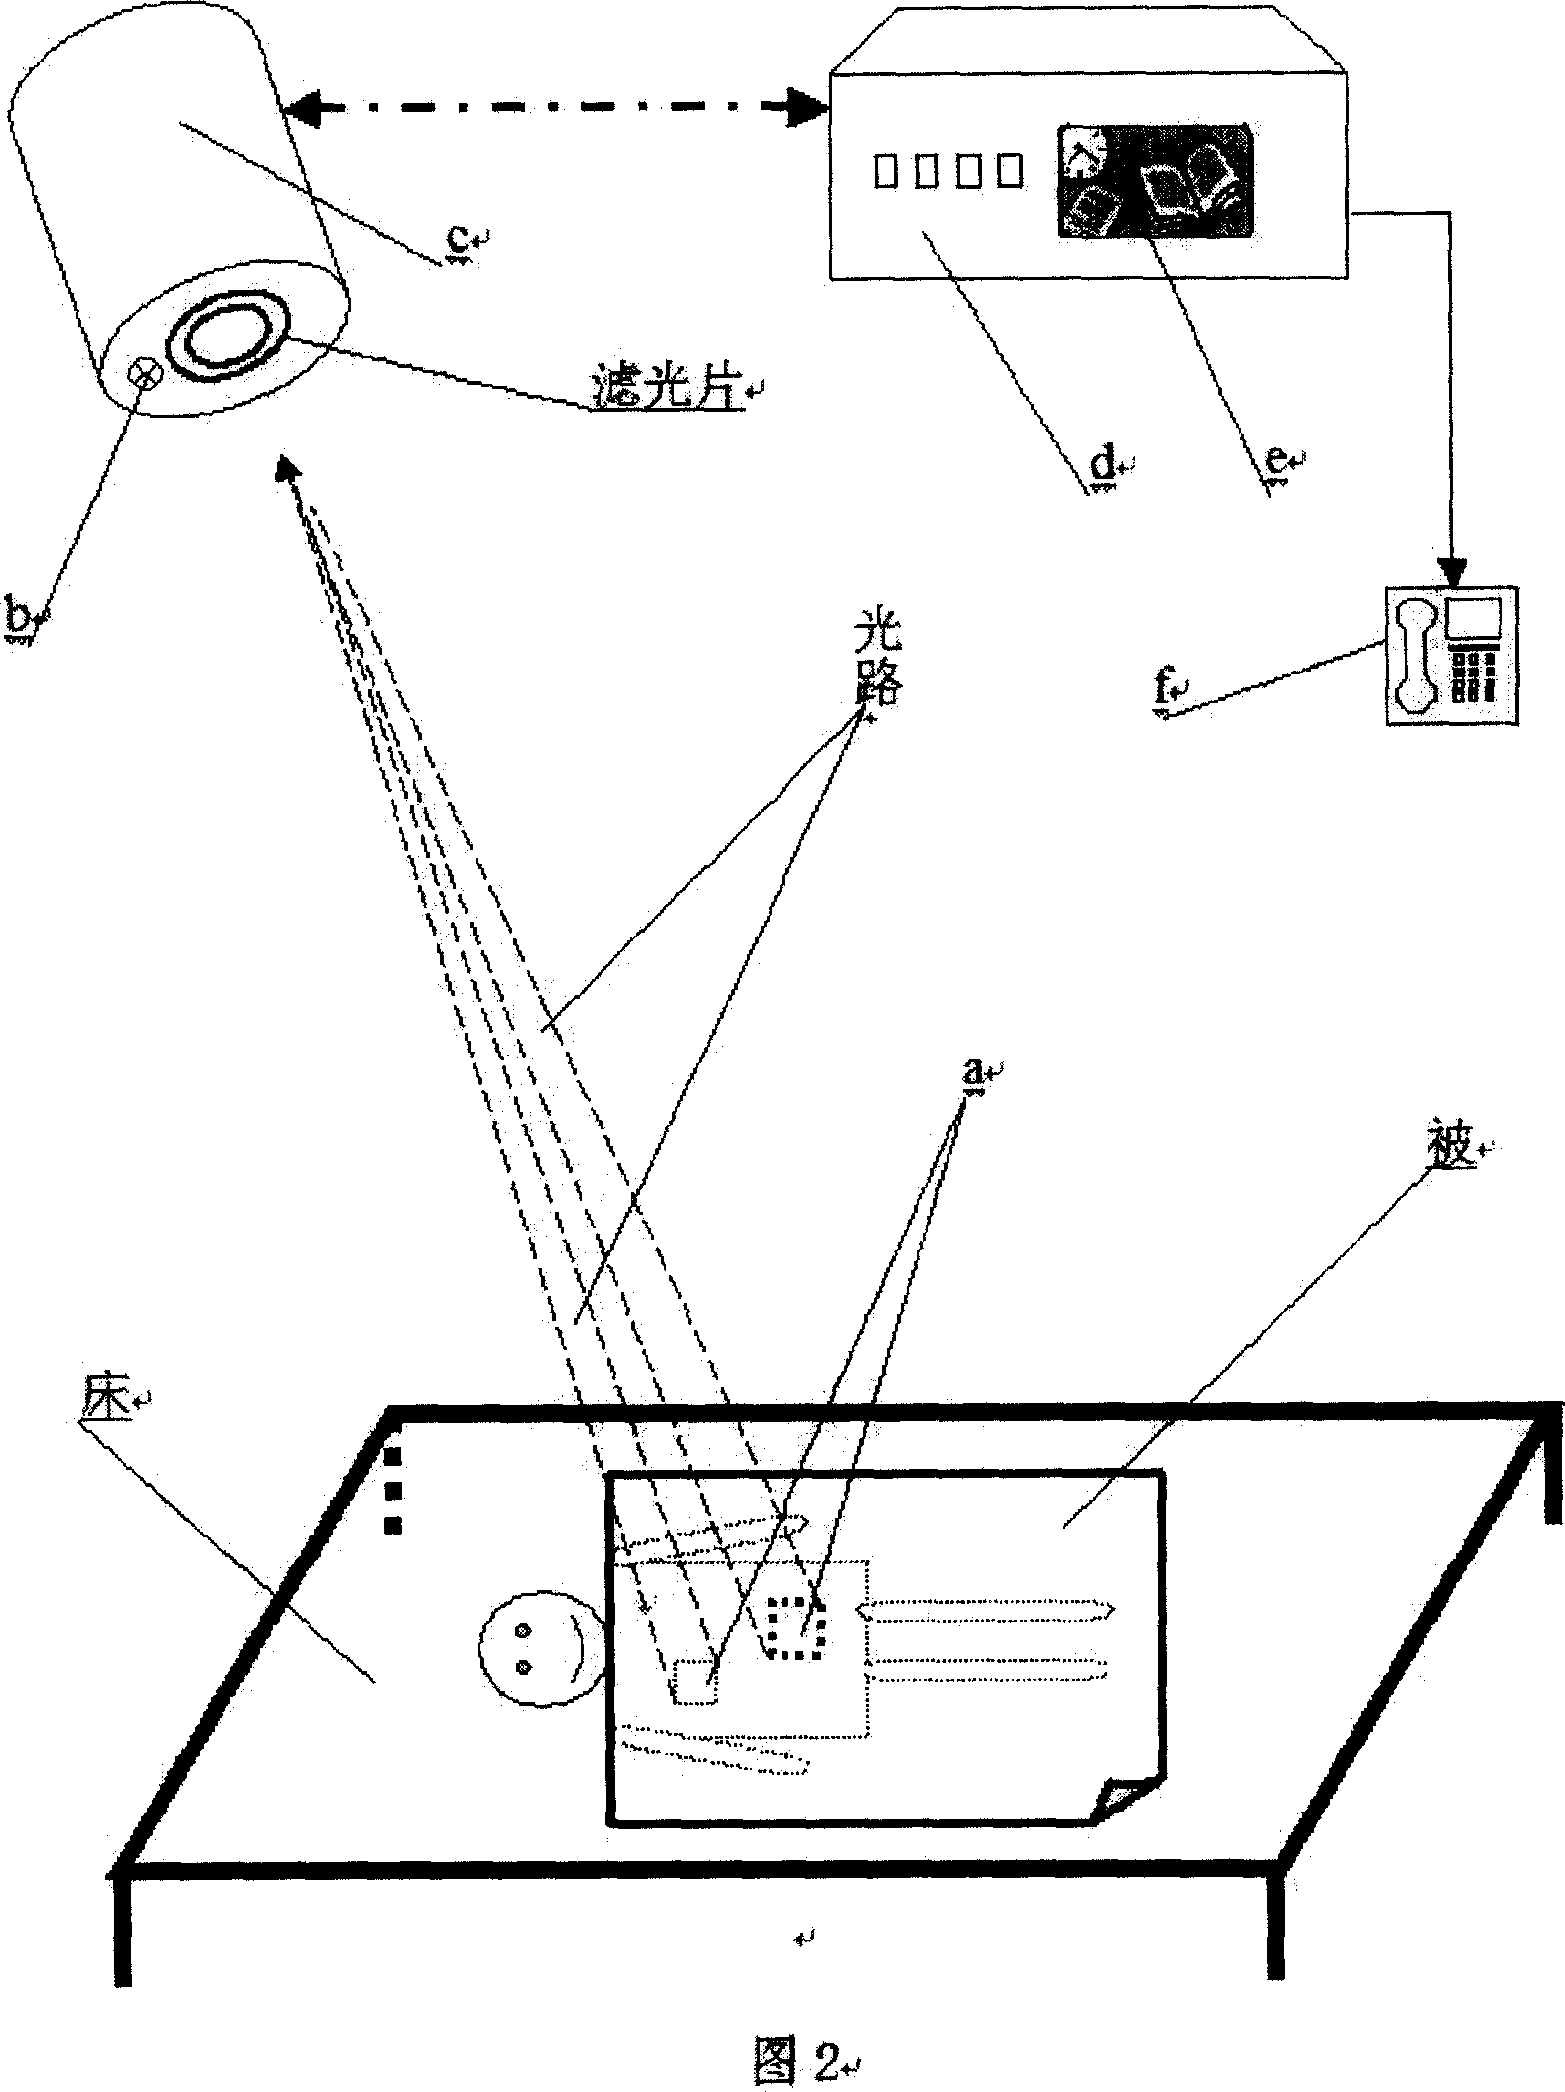 Human-body marking image monitoring system and its using system